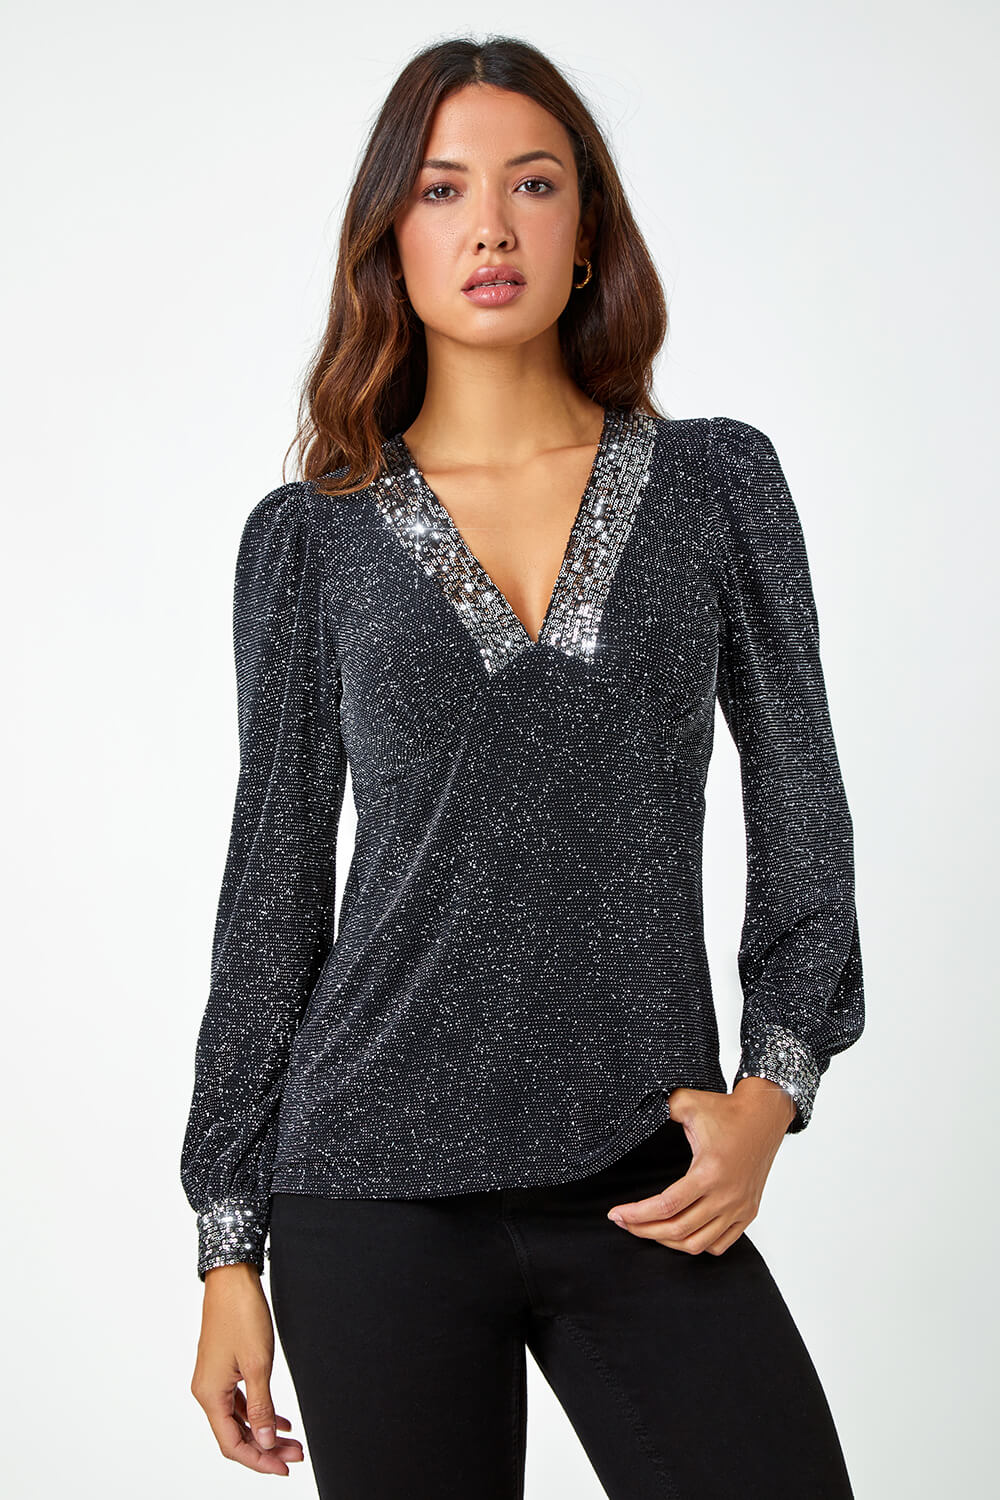 Silver Sequin Trim Shimmer Stretch Top, Image 4 of 5